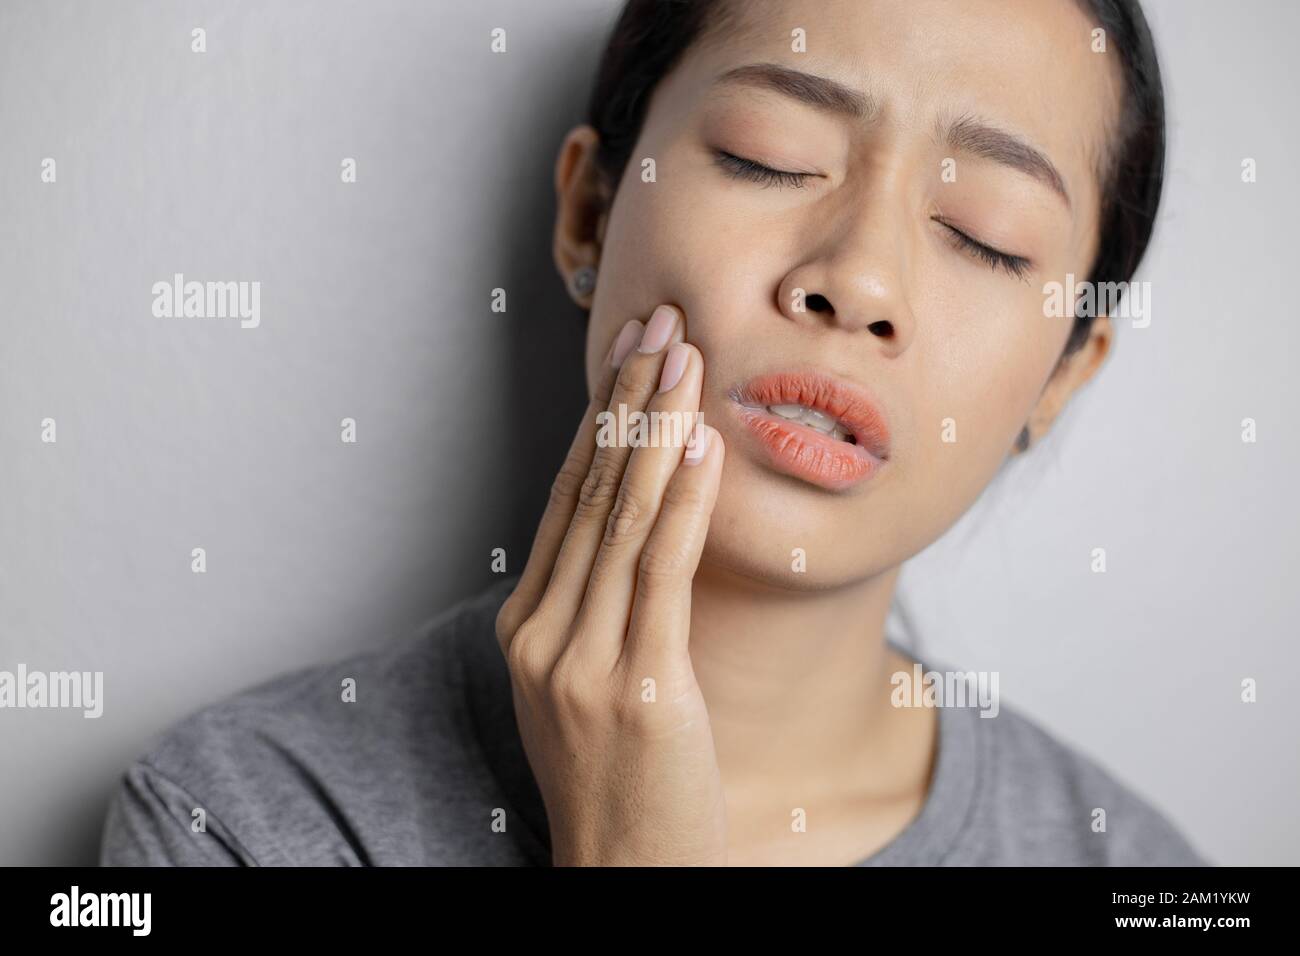 Woman put her hand on her cheek due to toothache. Asian  woman is suffering of toothache. Young woman with of toothache on a gray background. Stock Photo